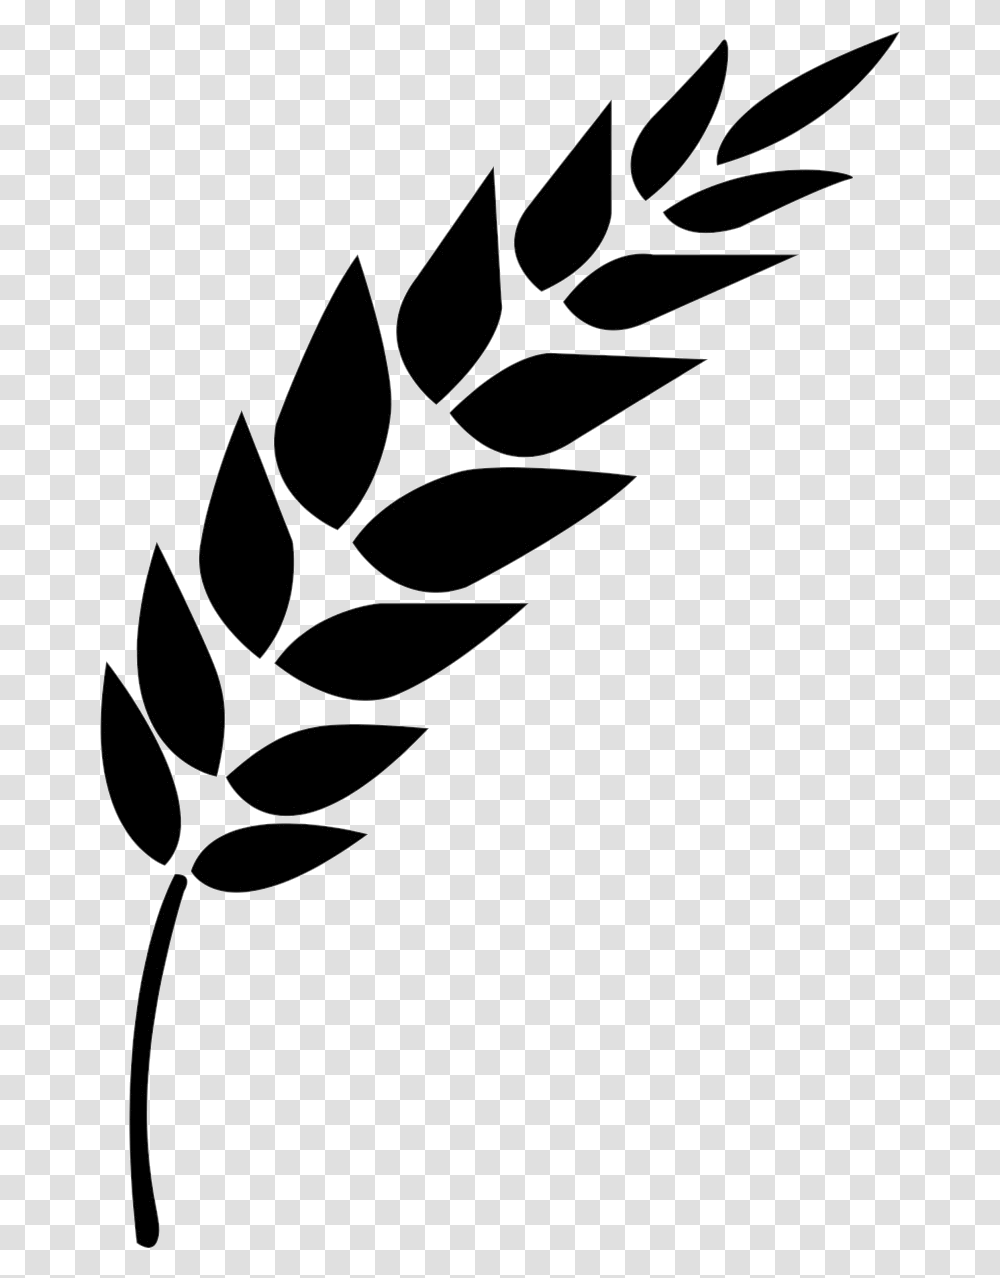 Wheat Vector Black And White Stalk Clipart Icon Vector Wheat, Spider Web, Gray Transparent Png